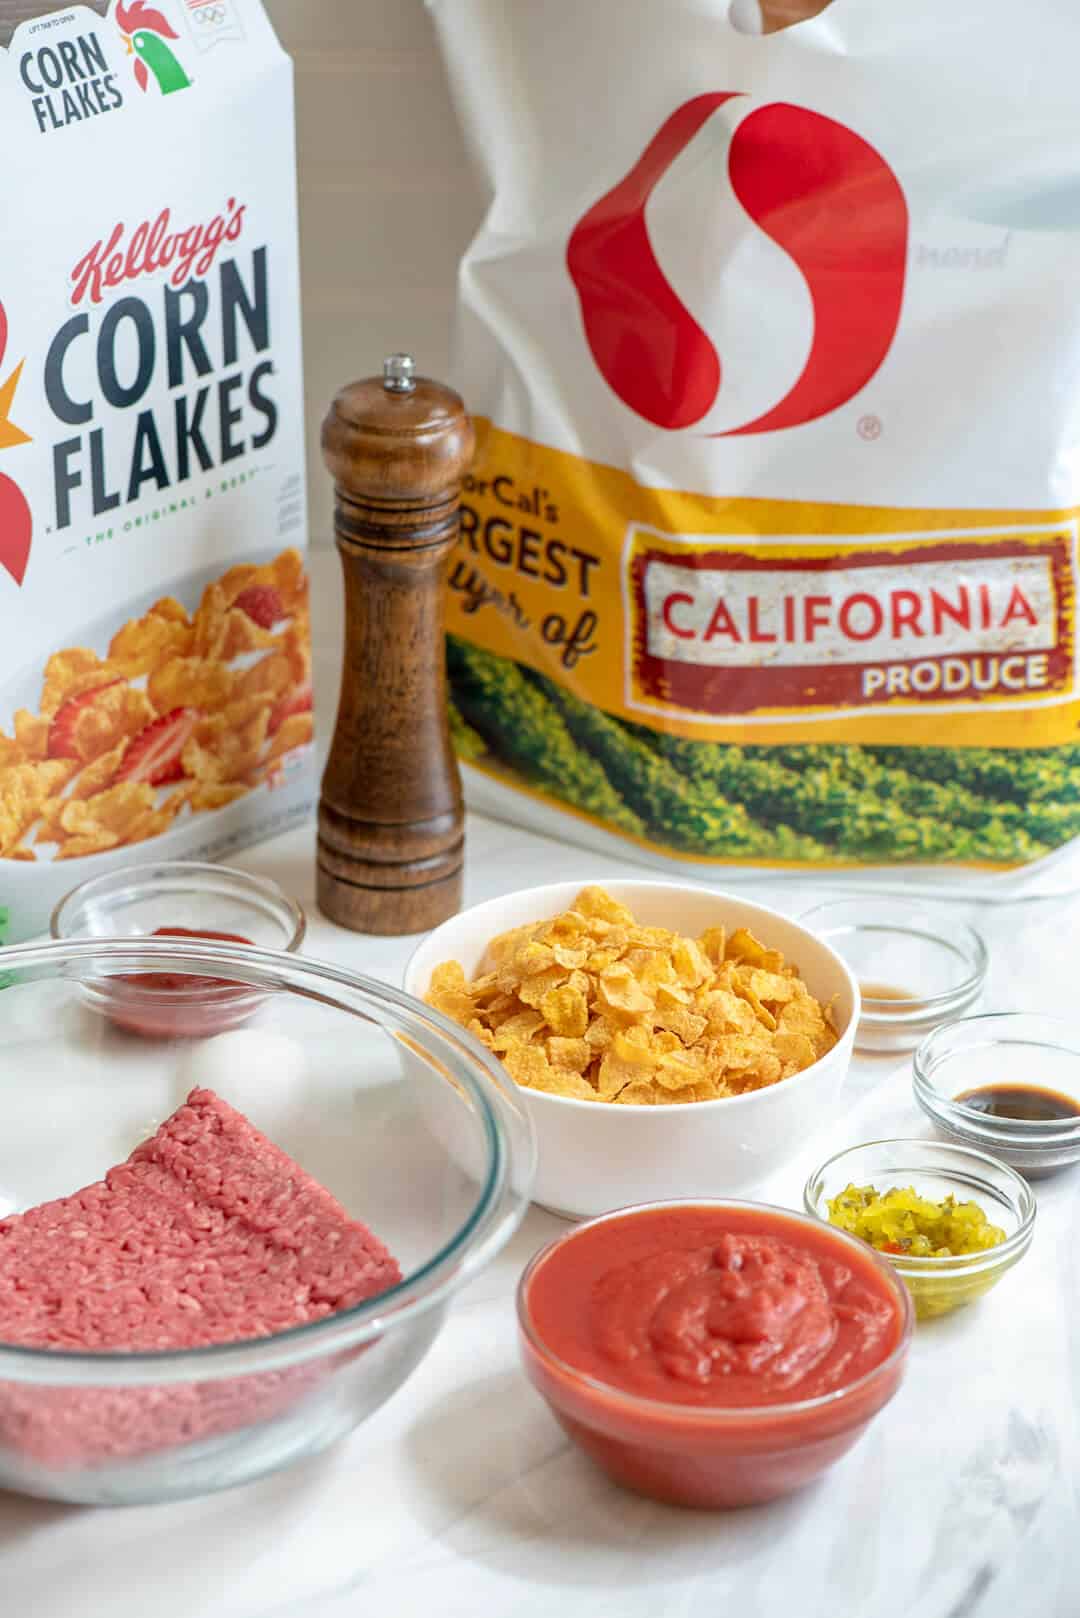 The Ingredients for Good and Spicy Meatballs in front of a white plastic Safeway grocery bag and a box of Kellogg's Corn Flakes.